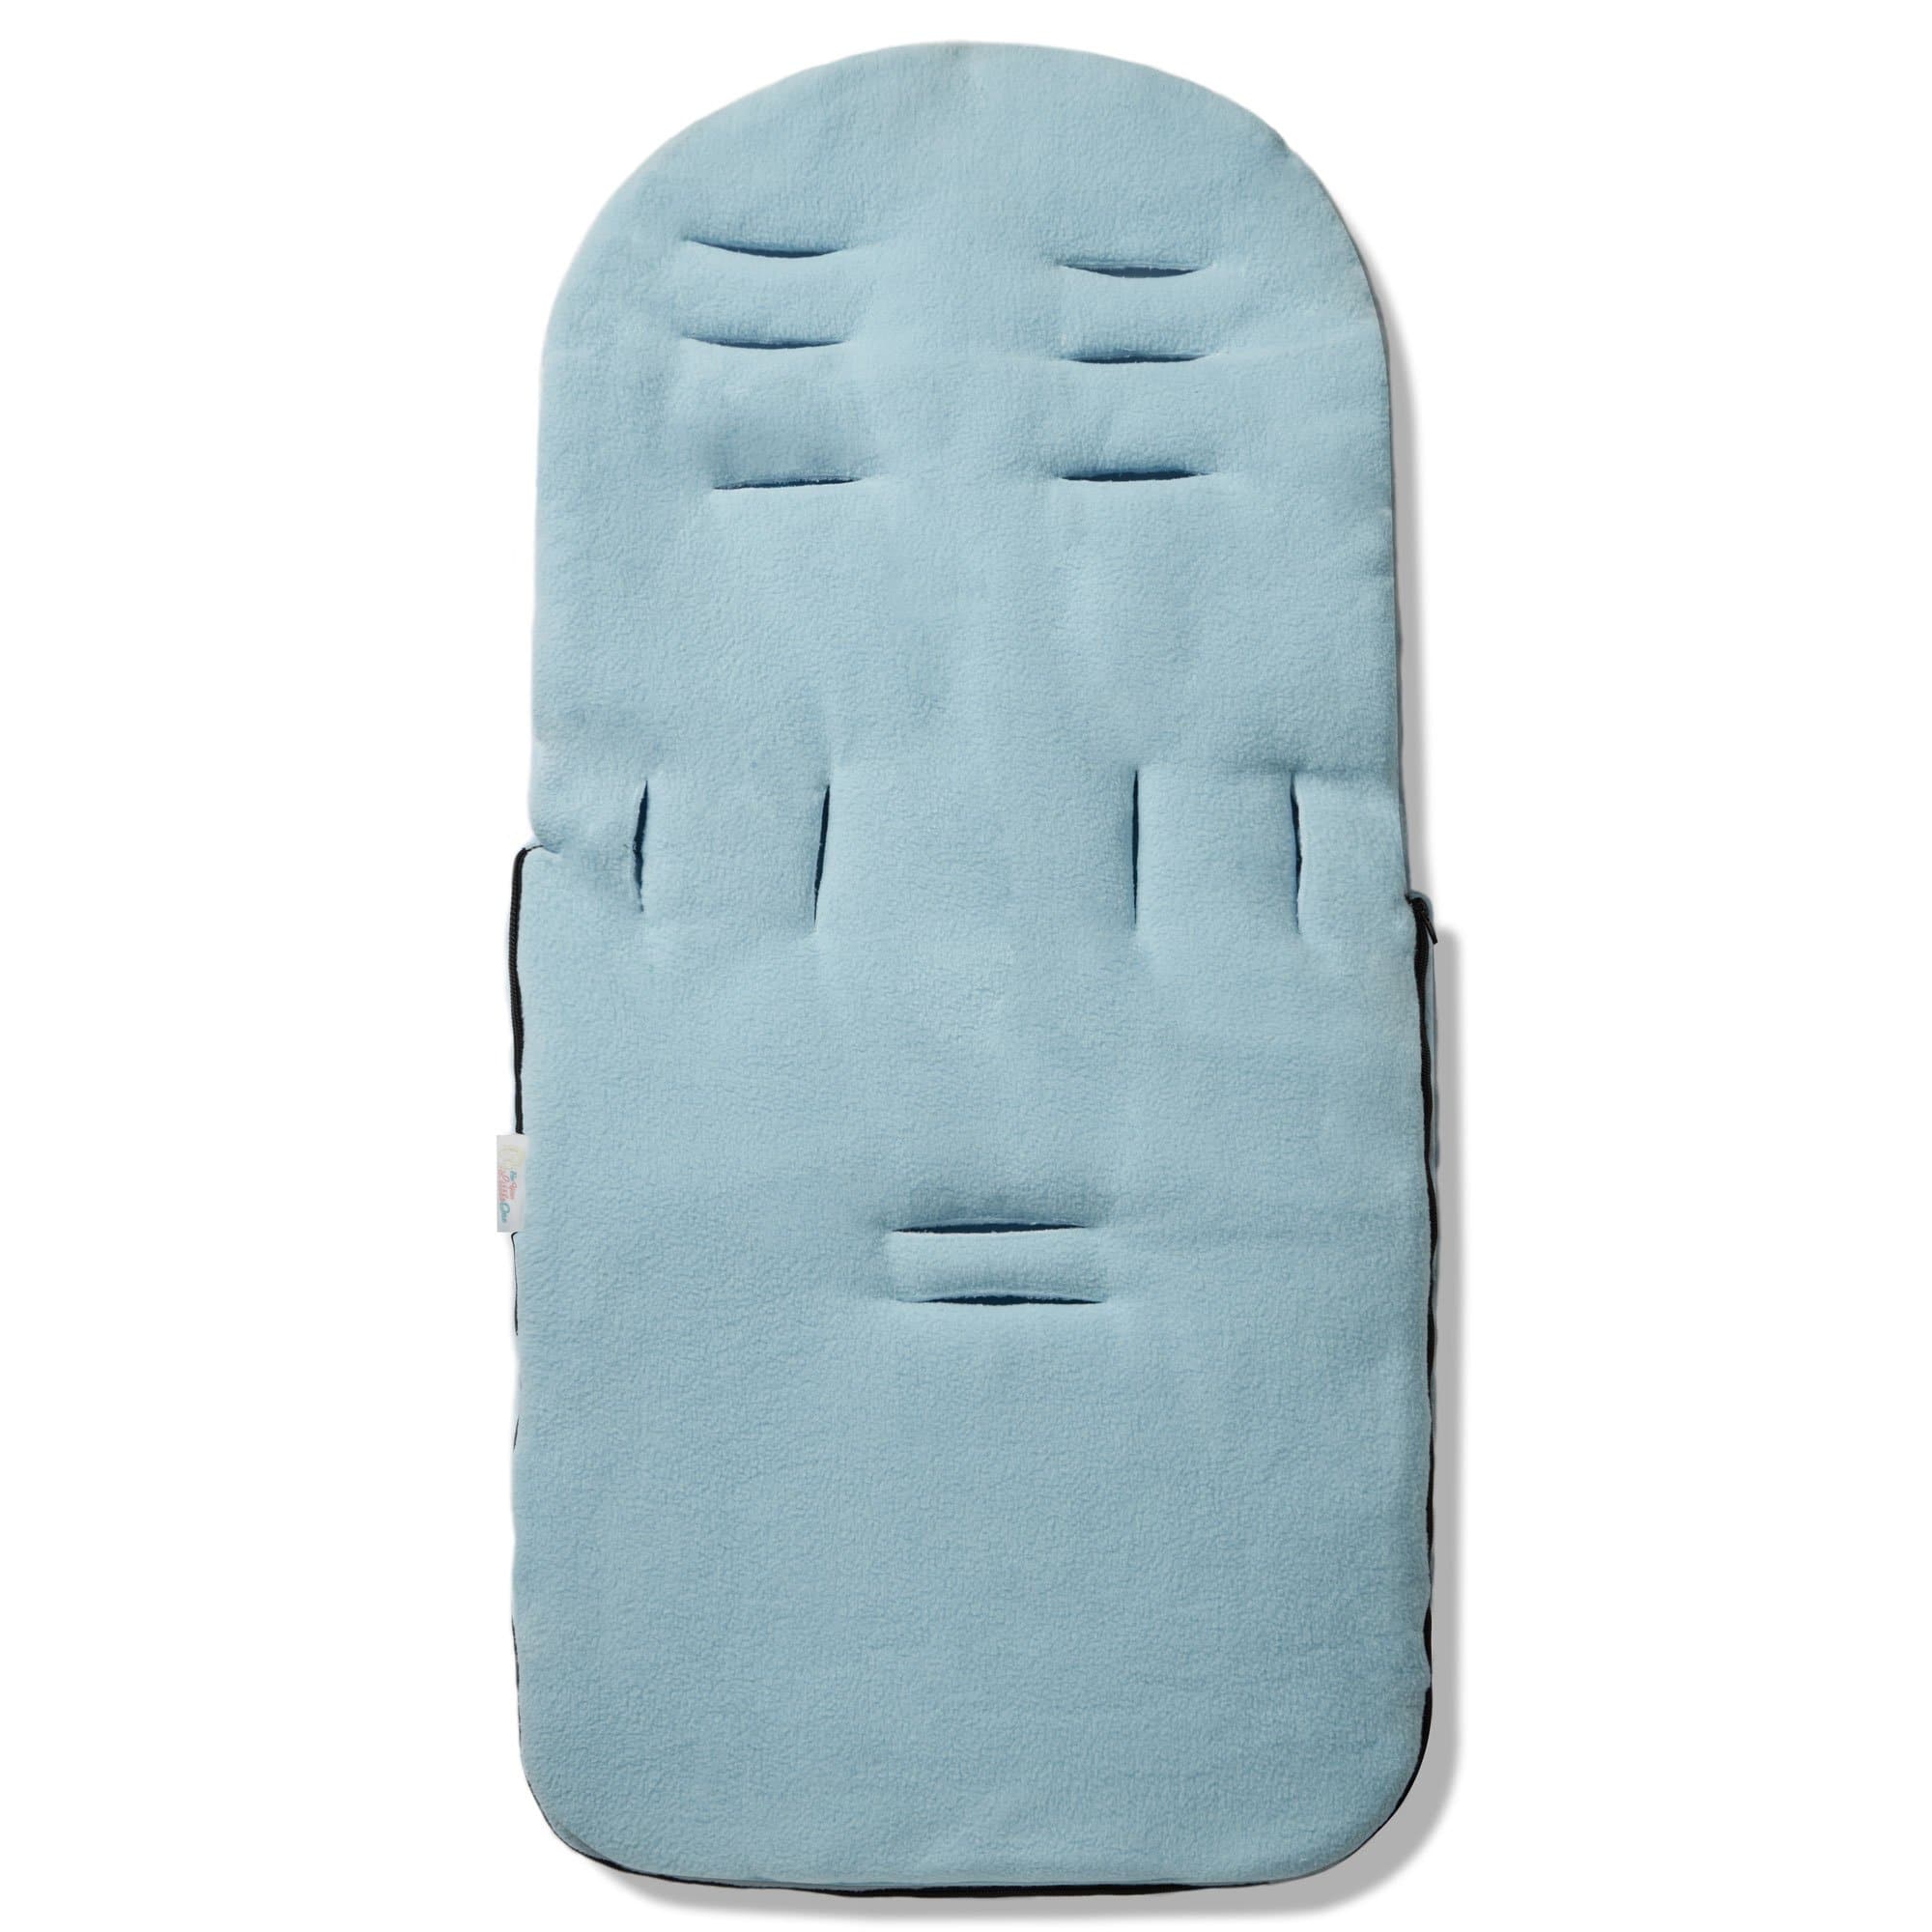 Dimple Footmuff / Cosy Toes Compatible with Maxi Cosi - For Your Little One